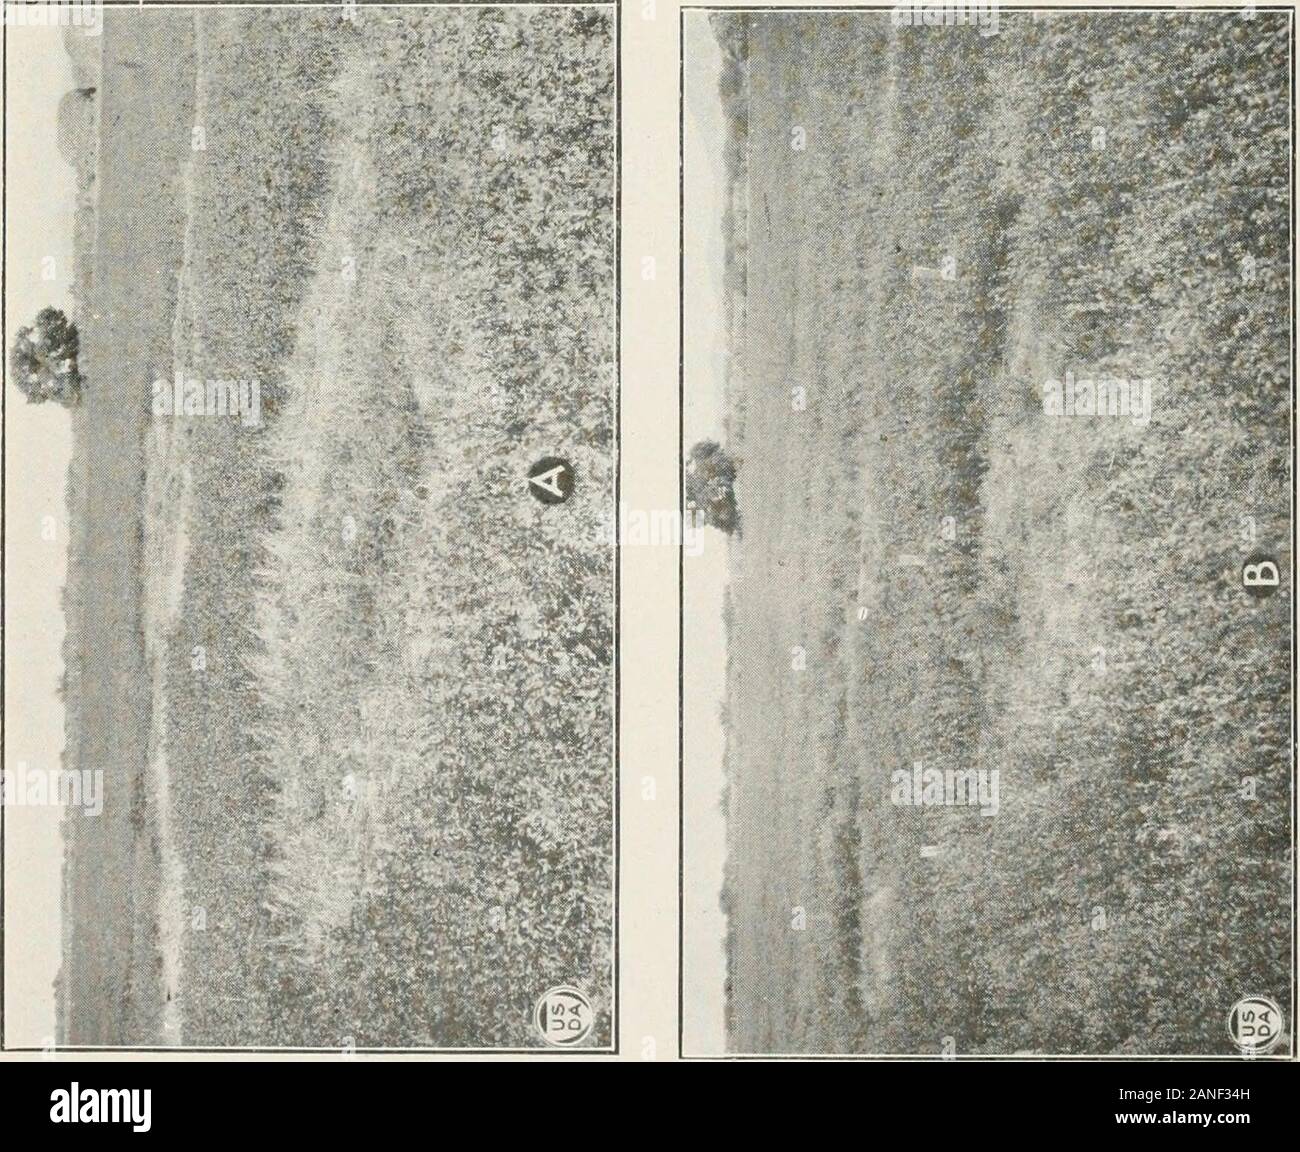 Journal of Agricultural Research . Journal of Agricultural Research Washington, D. C. PLATE 6 A.—Rootrot spot, approximately 7 meters in diameter, in an alfalfa field, Septem*ber 18, 1921. B.—The same spot June 18, 1922, at the beginning of seasonal activity, approxi-mately II meters in diameter. C.—The same spot July 6, 1922, at the point of conjunction with another infecterispot. D.—Rootrot circle 18 meters in diameter in alfalfa field, Sacaton, Ariz., 1923.Conidial mats several days old are shown near the periphery, and the zone of activedisease has advanced beyond them. A whitewash solutio Stock Photo